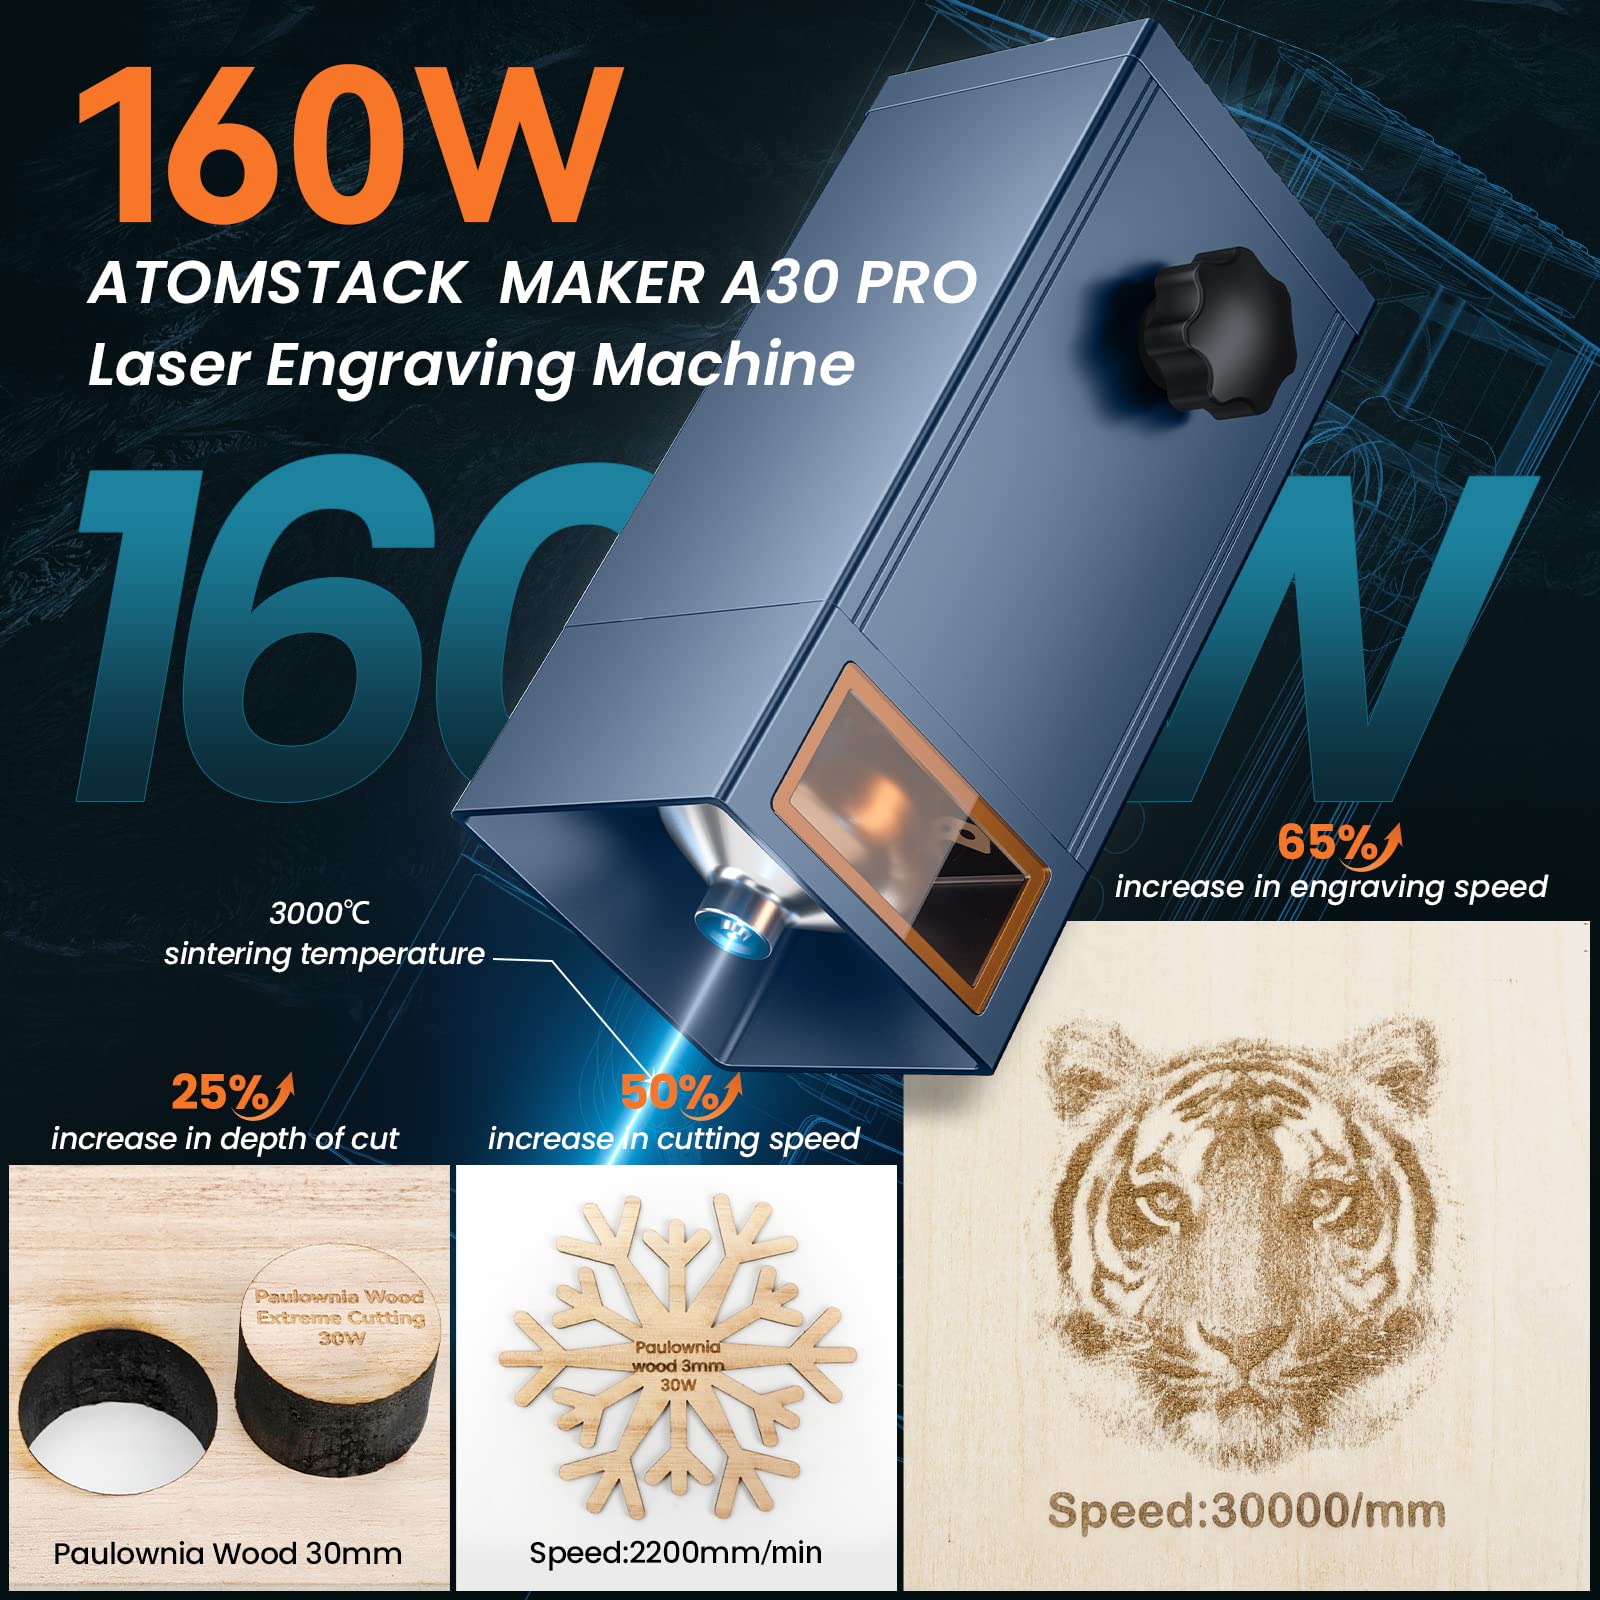 AtomStack A30 X30 S30 Pro 160w Laser Engraving Machine With F60 Air Assist Kit Extension Kit 850*400MM Large Area 33w Engraver